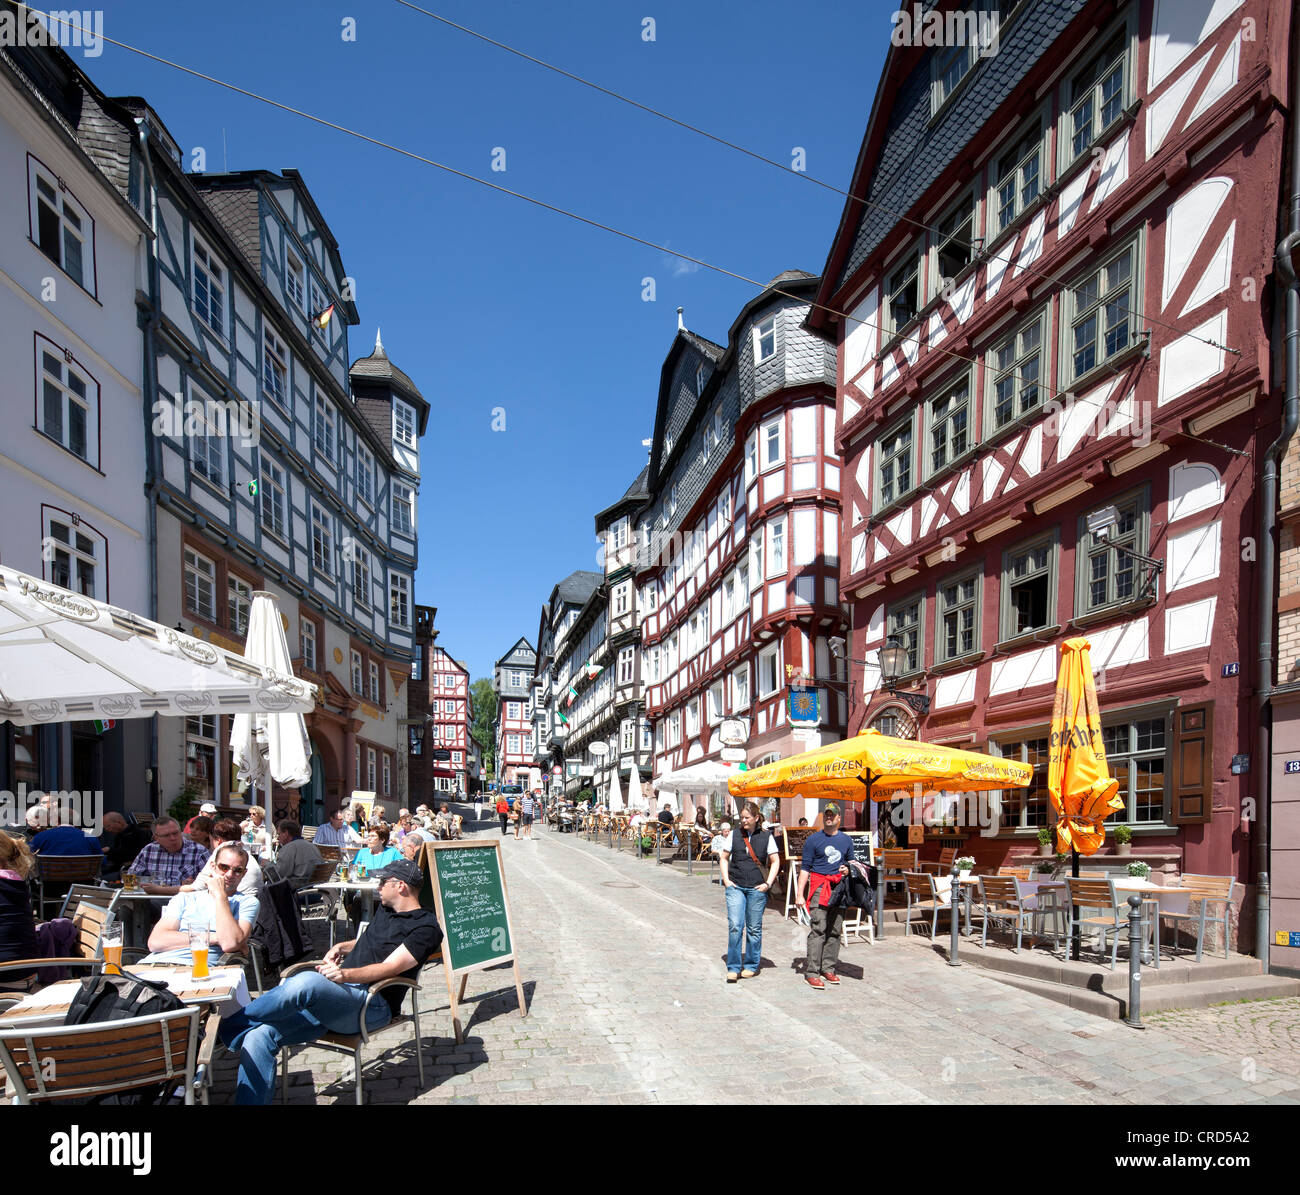 Half-timbered houses in the historic town centre, Marburg, Hesse, Germany, Europe, PublicGround Stock Photo